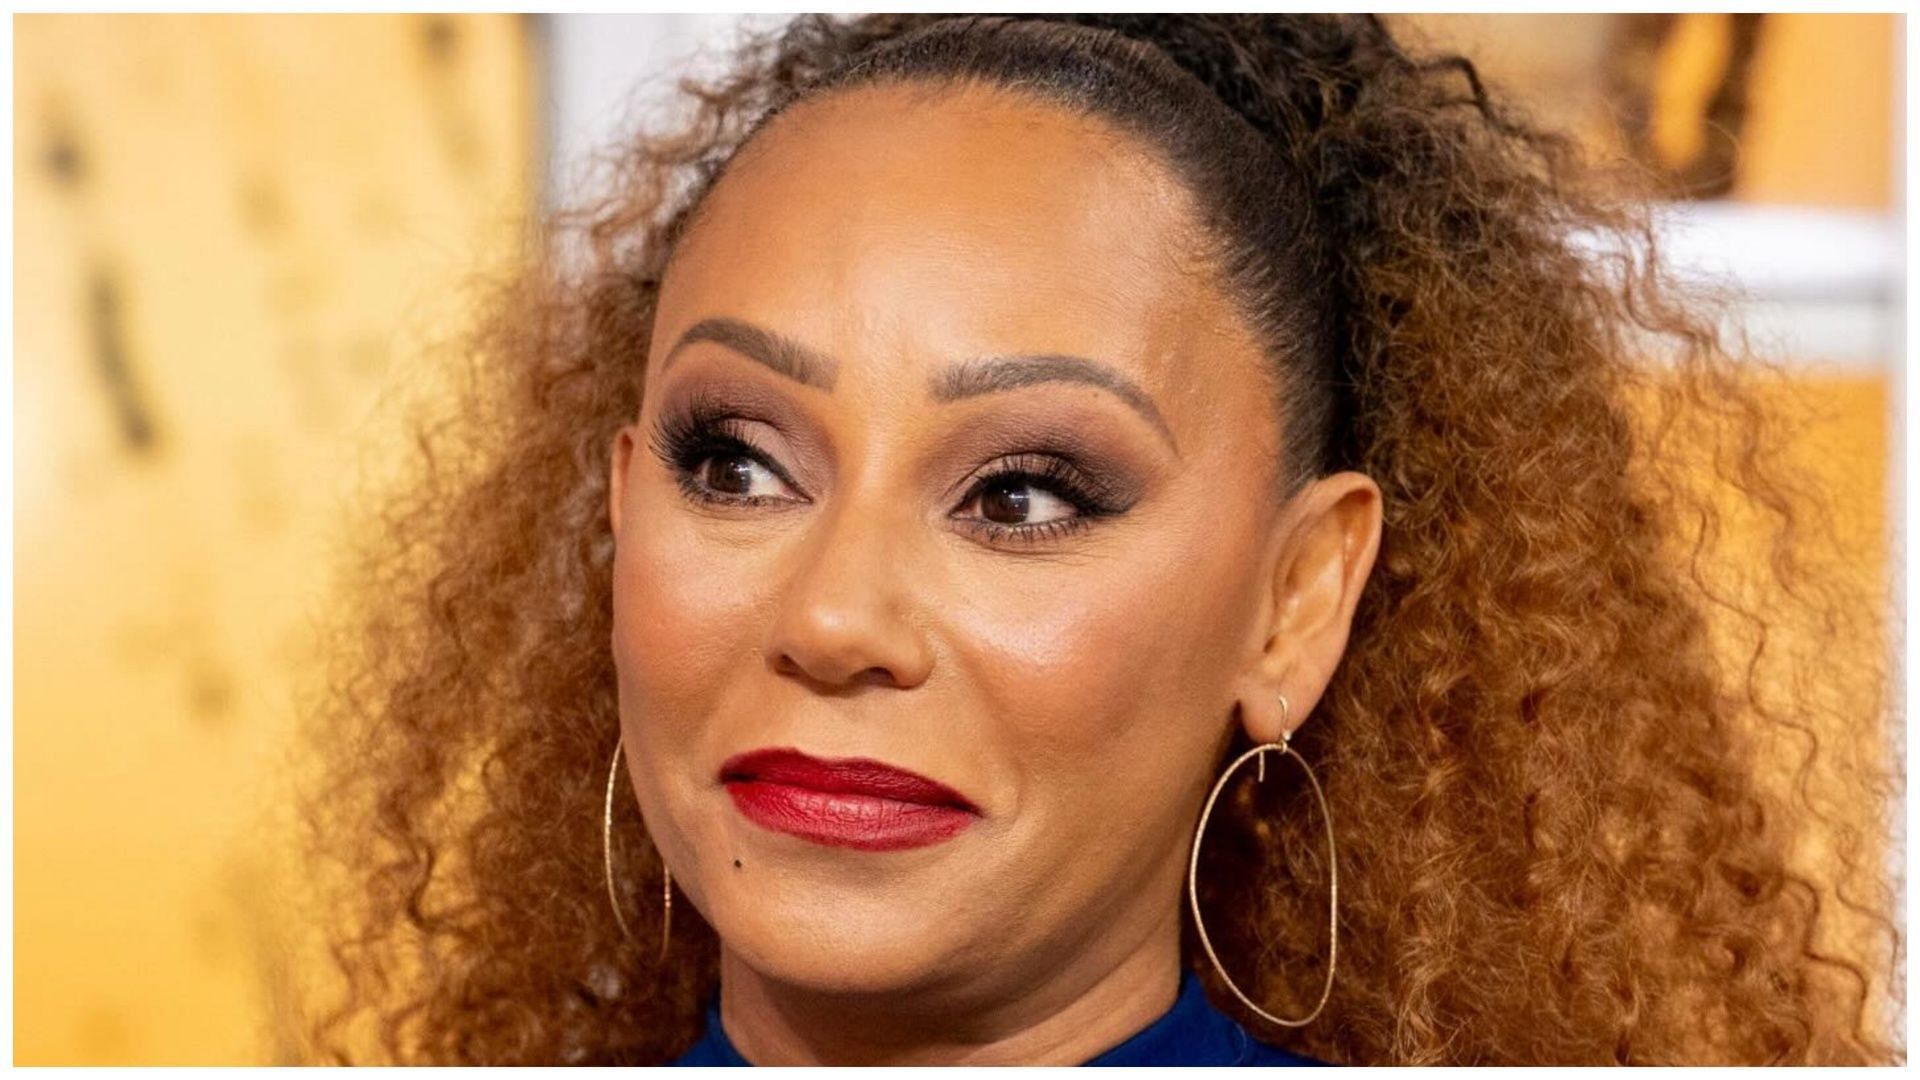 Mel B was kicked out of the Spice Girls WhatsApp group (Image via Instagram/@officialmelb)